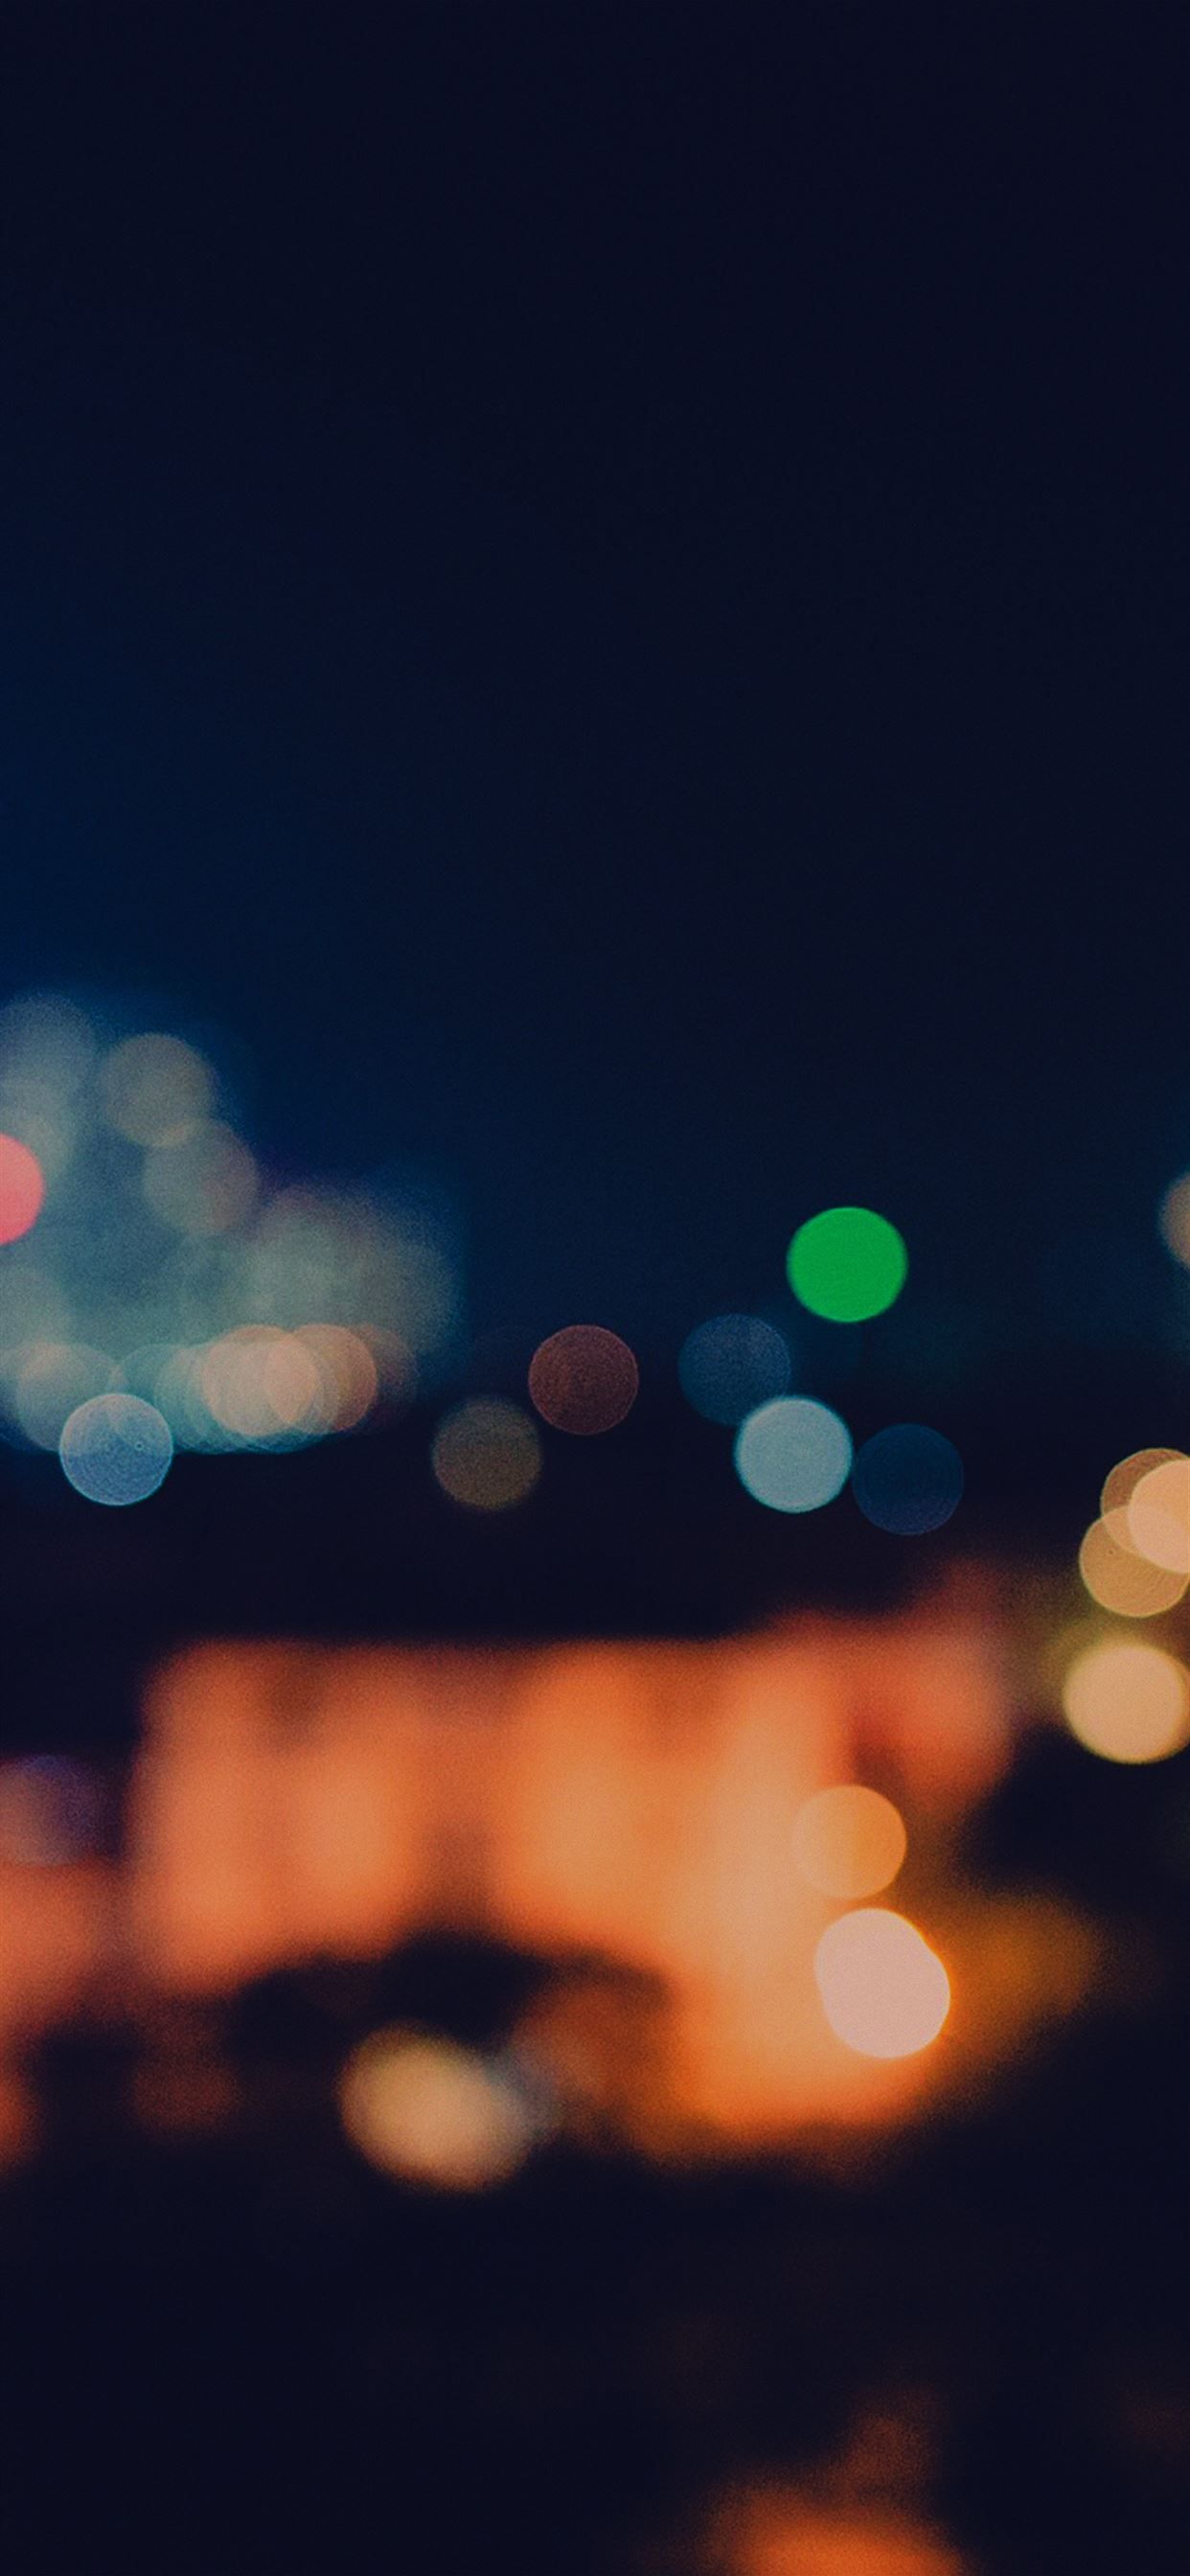 Bokeh lights in the night city wallpaper 1242x2688 for iPhone X - Night